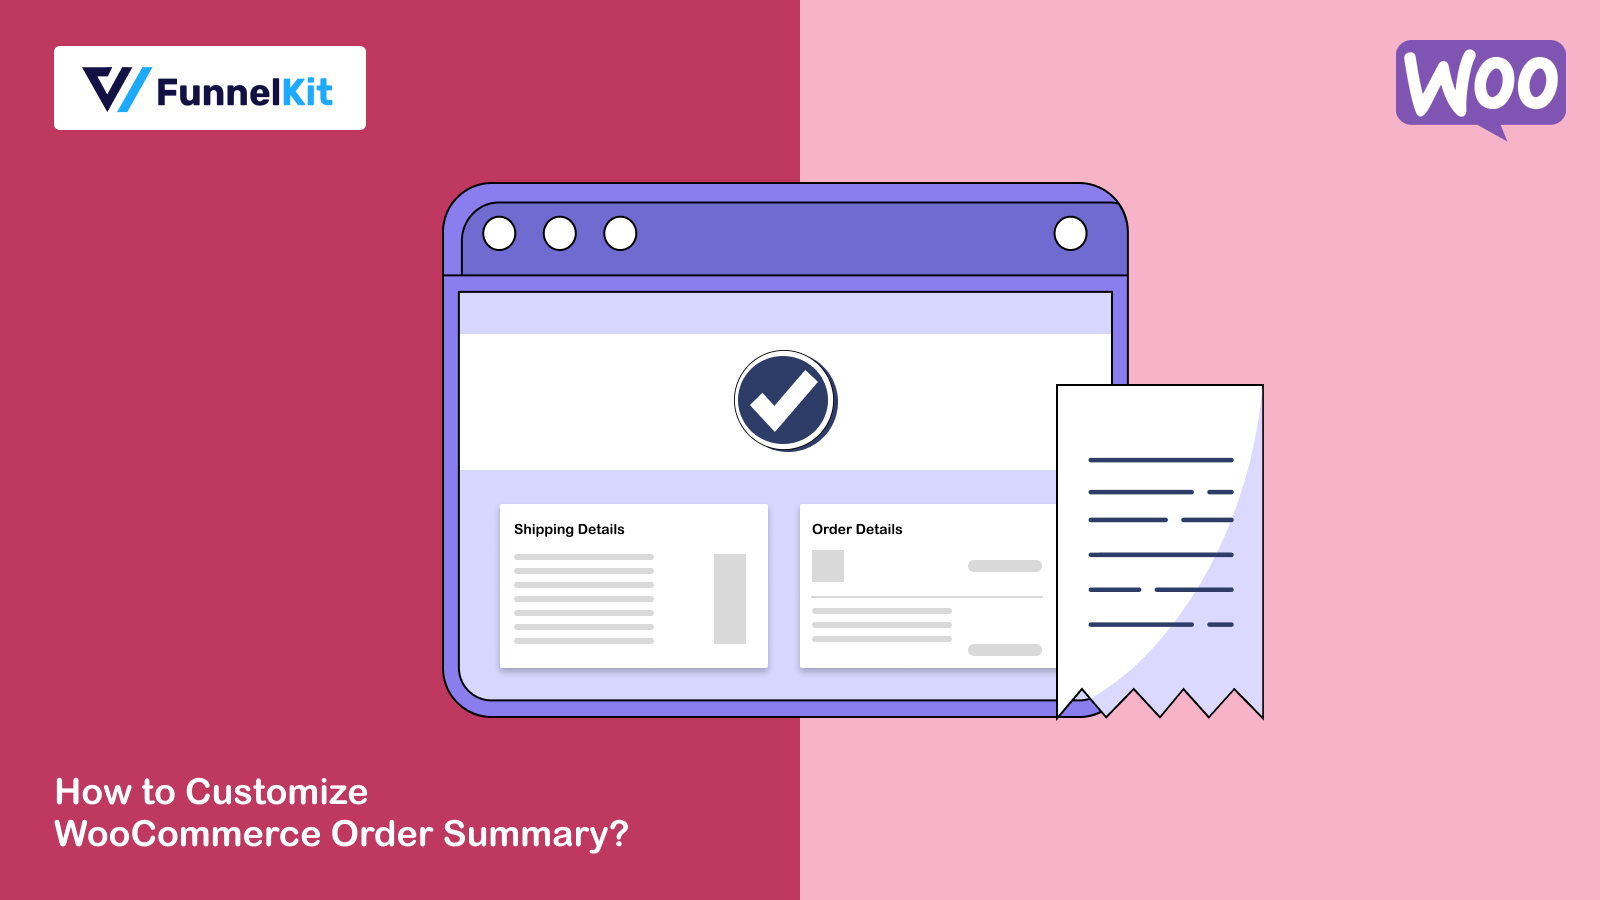 How to Customize WooCommerce Order Summary in Your Store (Step-by-Step Guide)